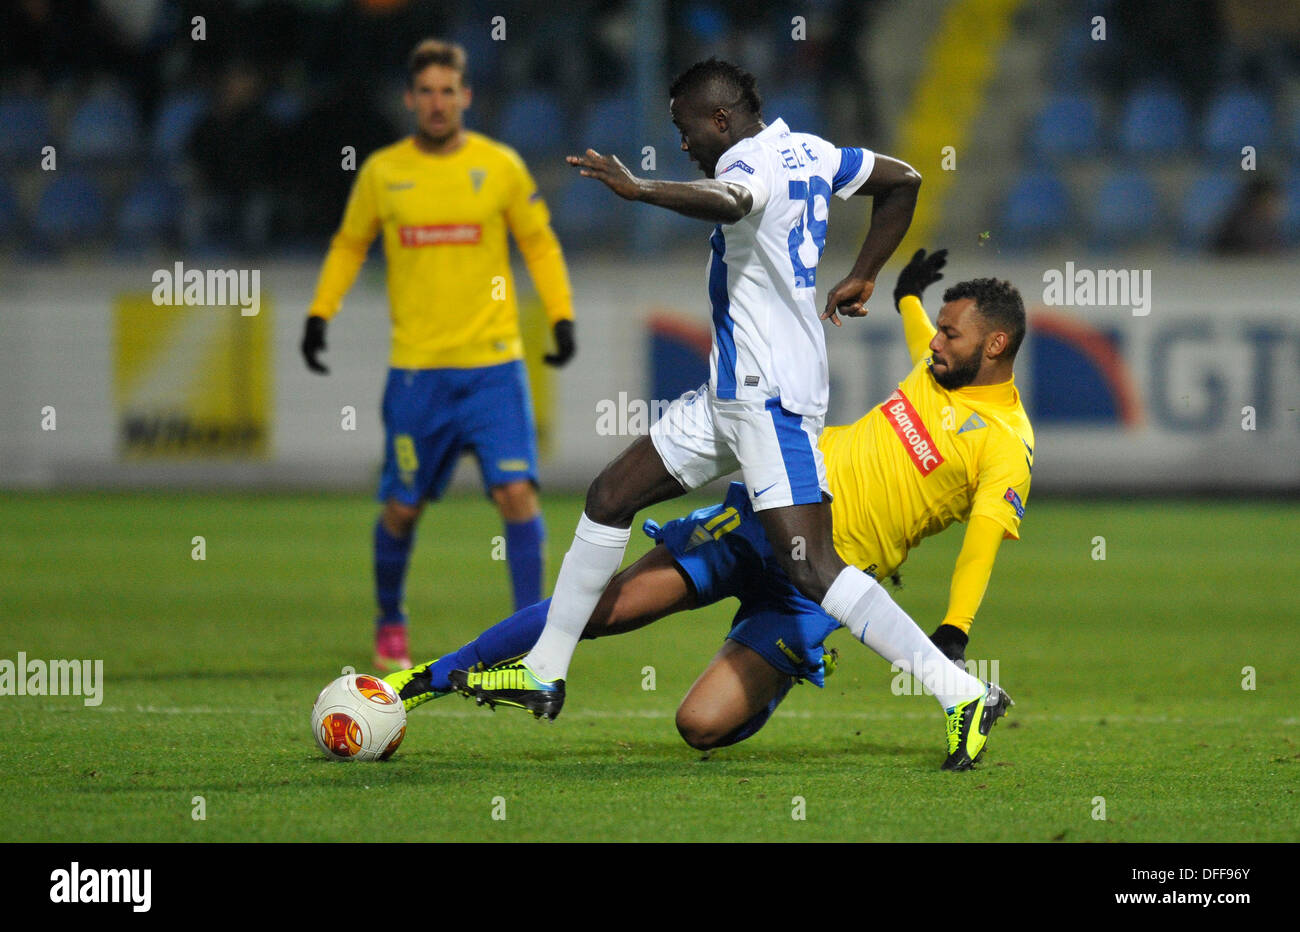 Liberec, Czech Republic. 3rd Oct, 2013. Joao Pedro Galvao of GD Estoril Praia soccer team, right, fights for the ball with Dzon Delarge of Slovan Liberec, left, during their Europa League Group H match in Liberec, Czech Republic, Thursday, October 3, 2013. Credit:  Radek Petrasek/CTK Photo/Alamy Live News Stock Photo